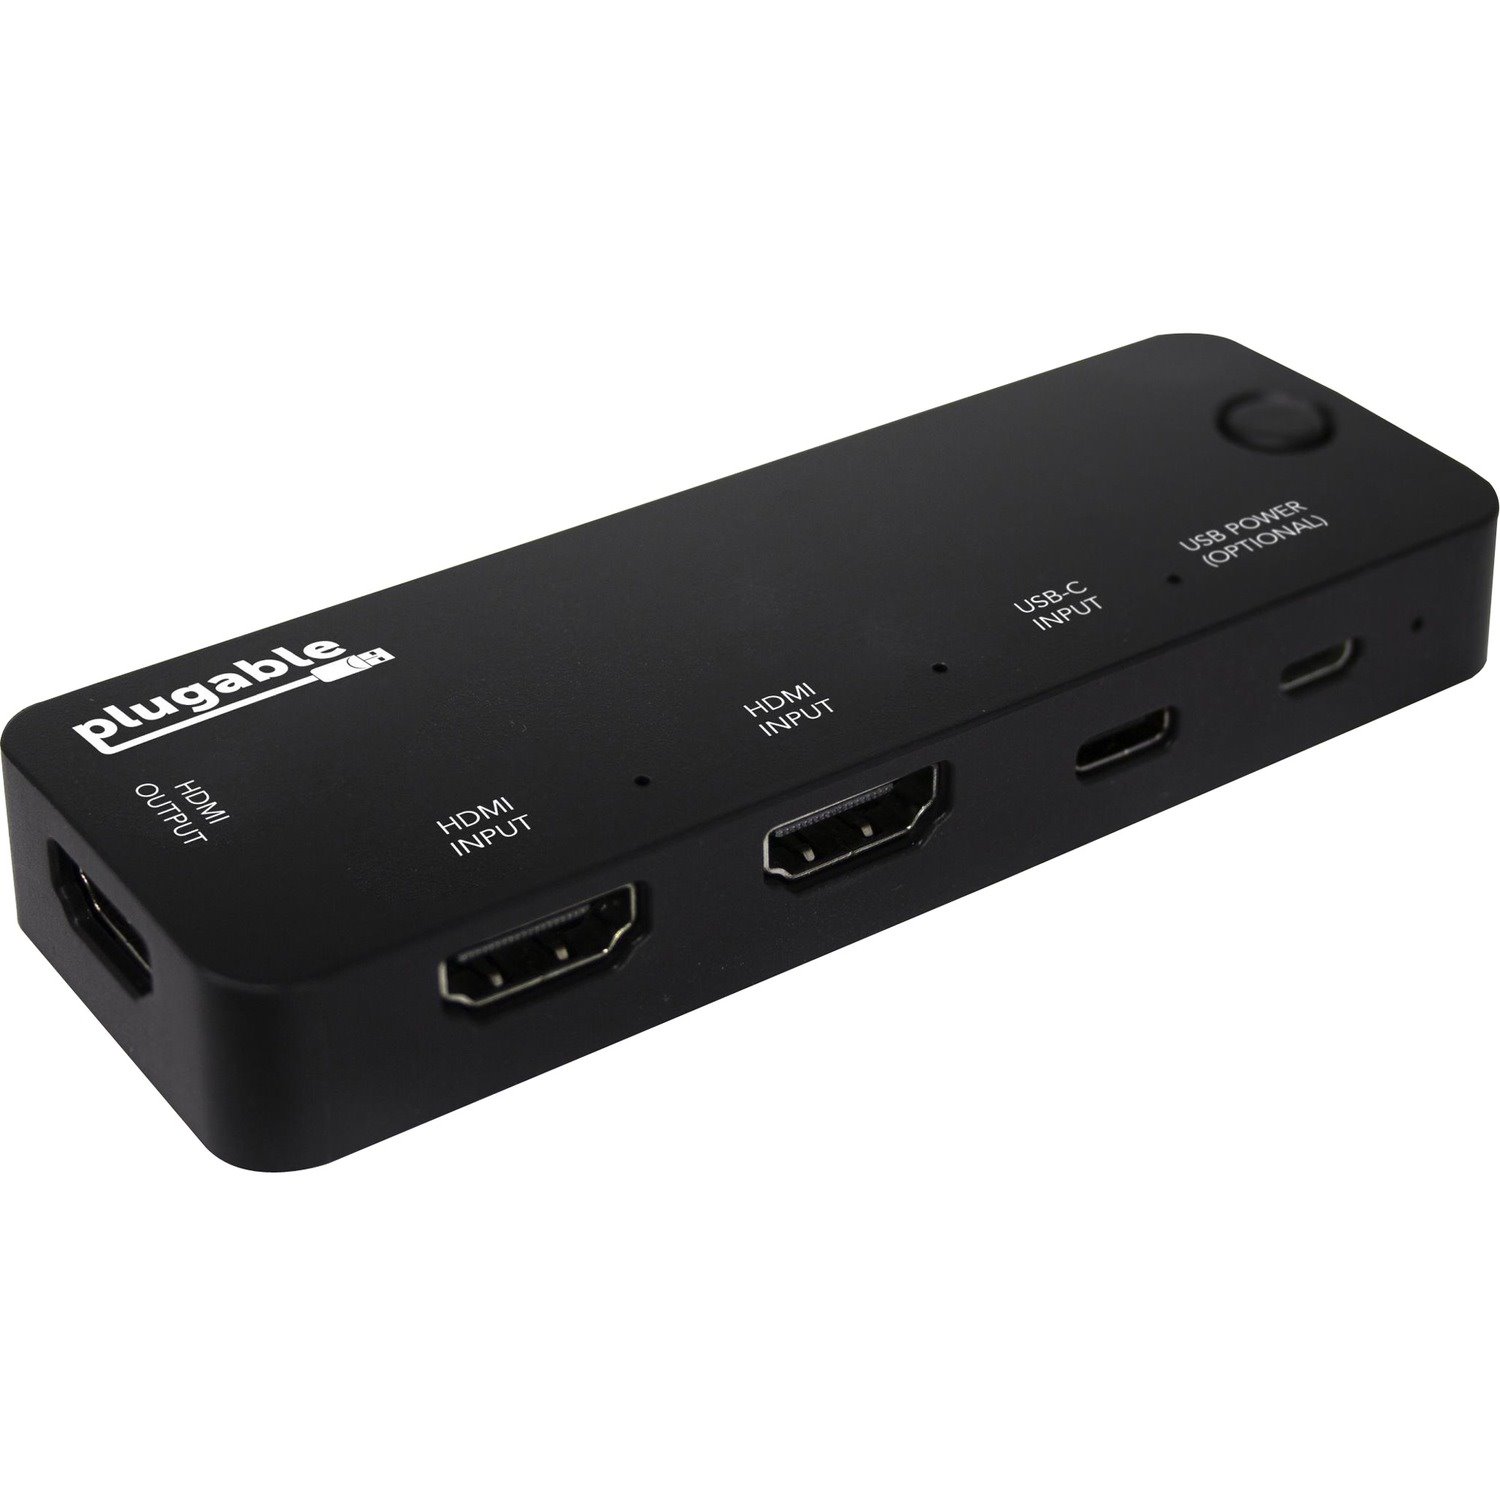 Plugable HDMI 2.0 and USB-C 3 Port Switch with 2 HDMI and 1 USB-C Inputs and Single HDMI 2.0 Output (Supports 2x HDMI 2.0 4K@60Hz Sources and 1x USB C or Thunderbolt 3 Source)